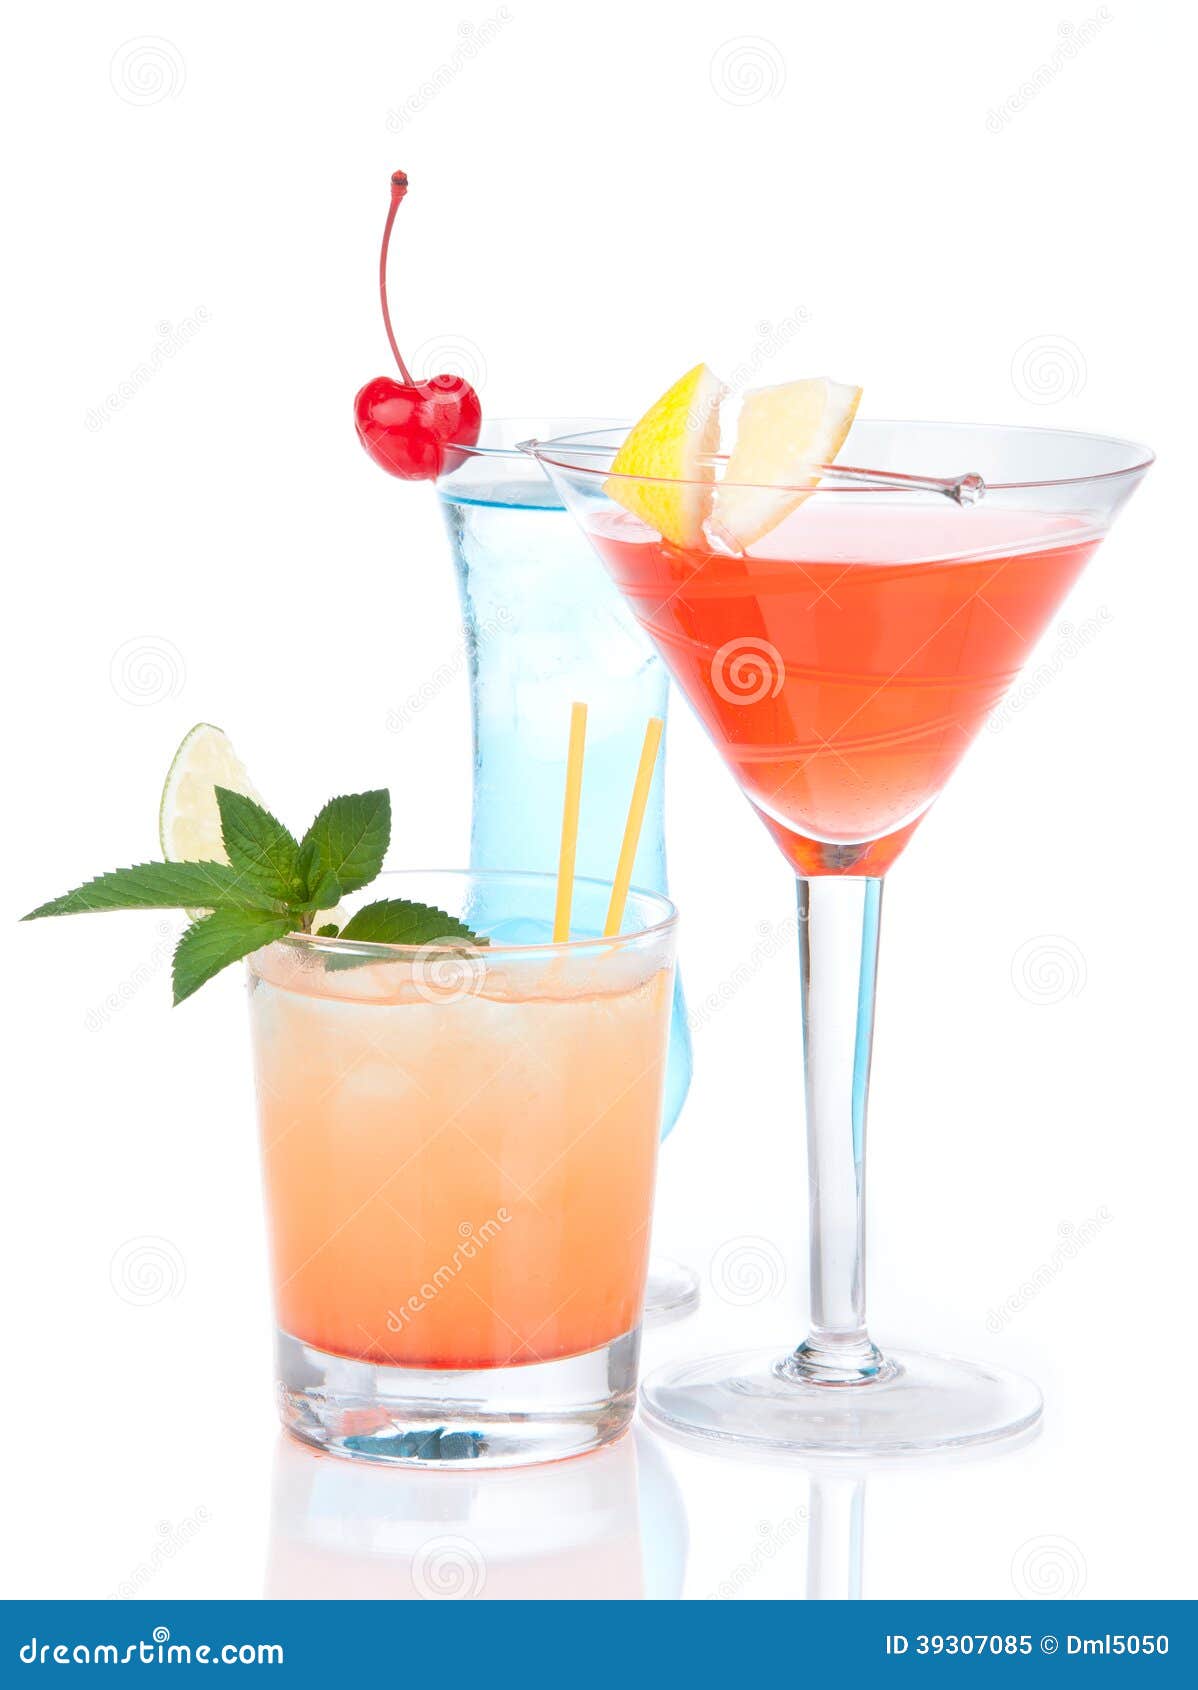 Download 1 562 Yellow Red Alcohol Margarita Photos Free Royalty Free Stock Photos From Dreamstime Yellowimages Mockups